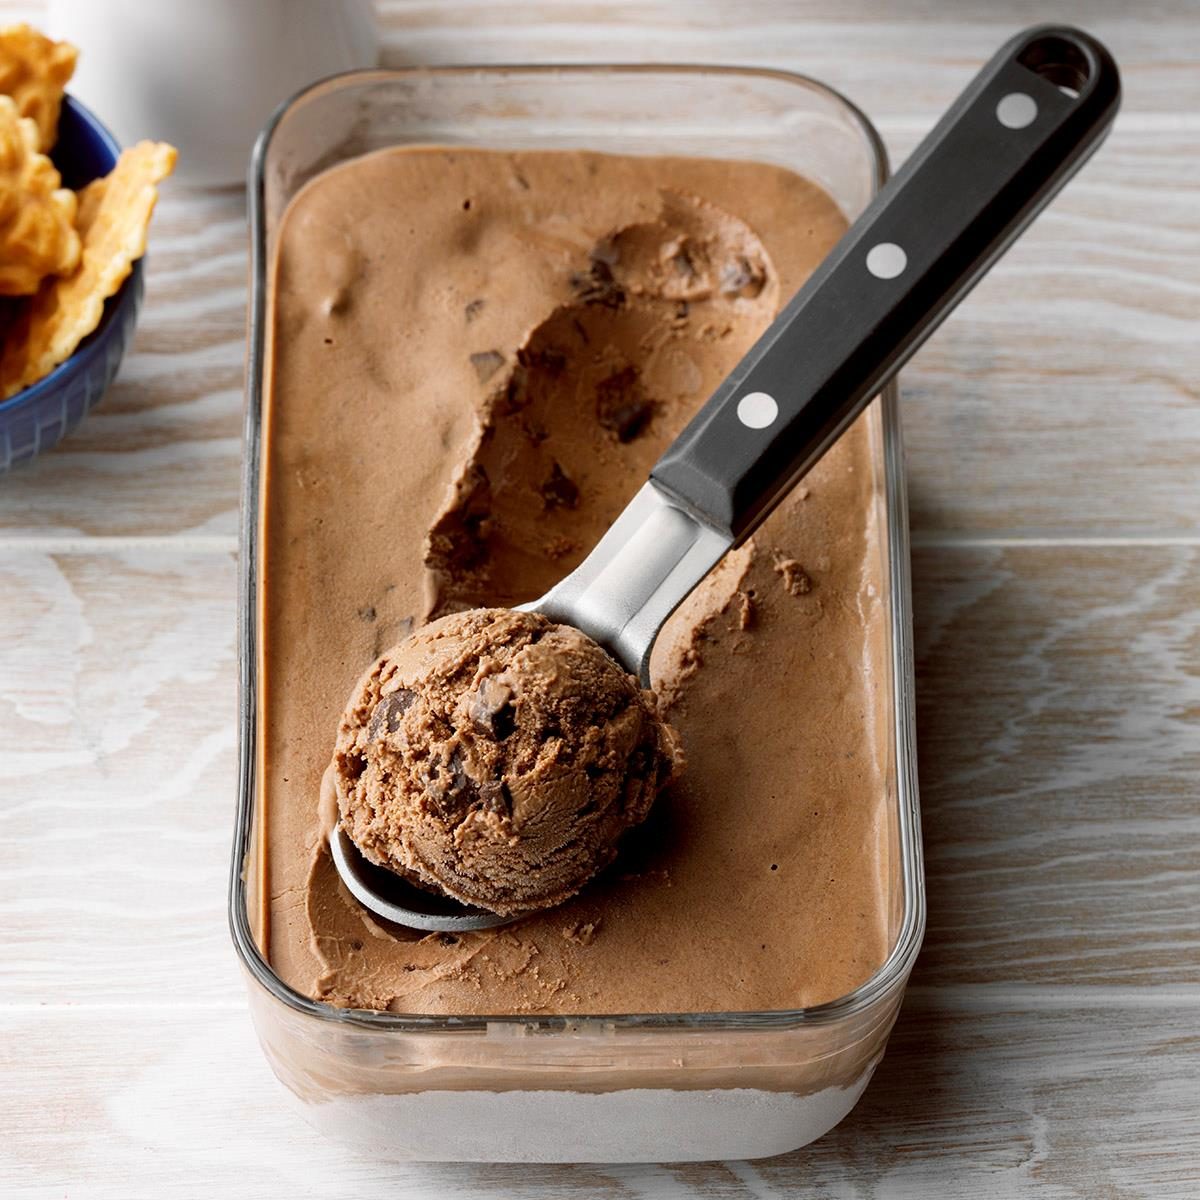 The Ultimate Guide to Storing Ice Cream at Home – CALICLE